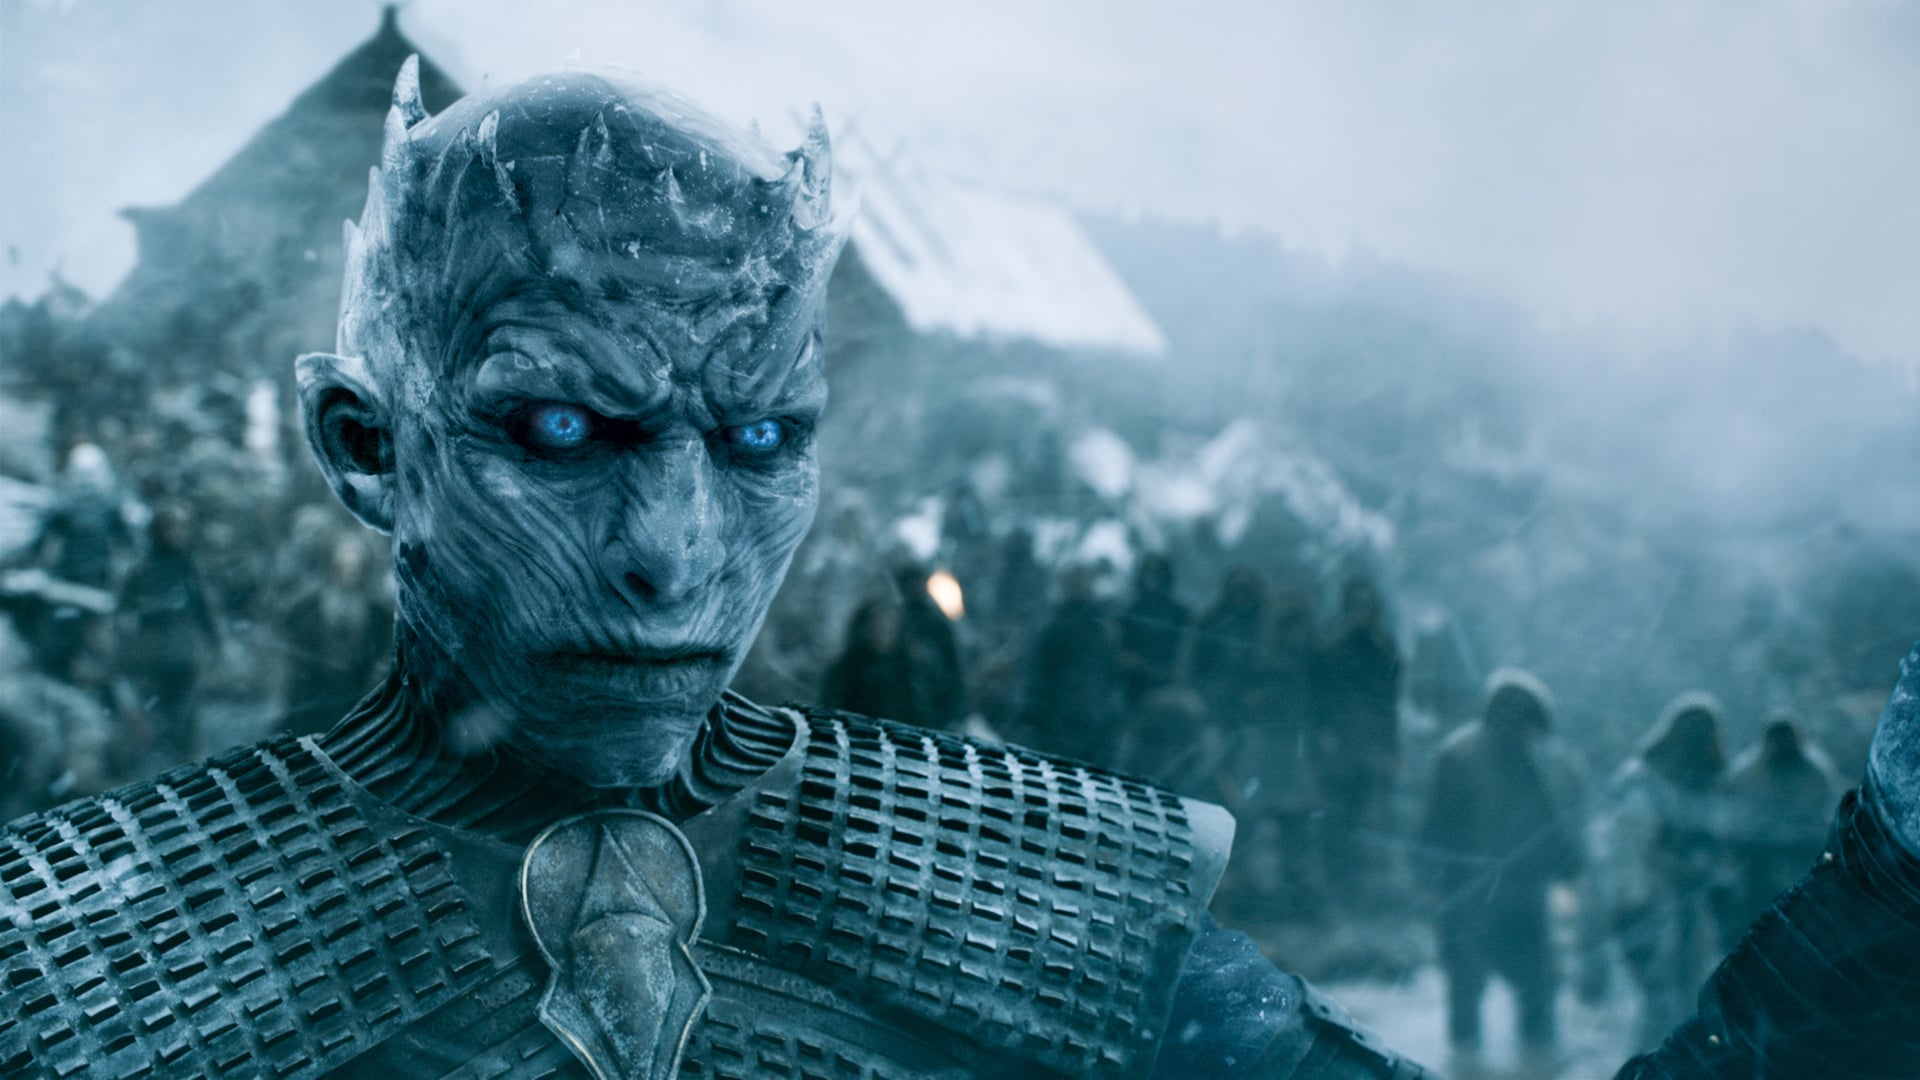 If The Night King Dies On Game Of Thrones Does His Army Die